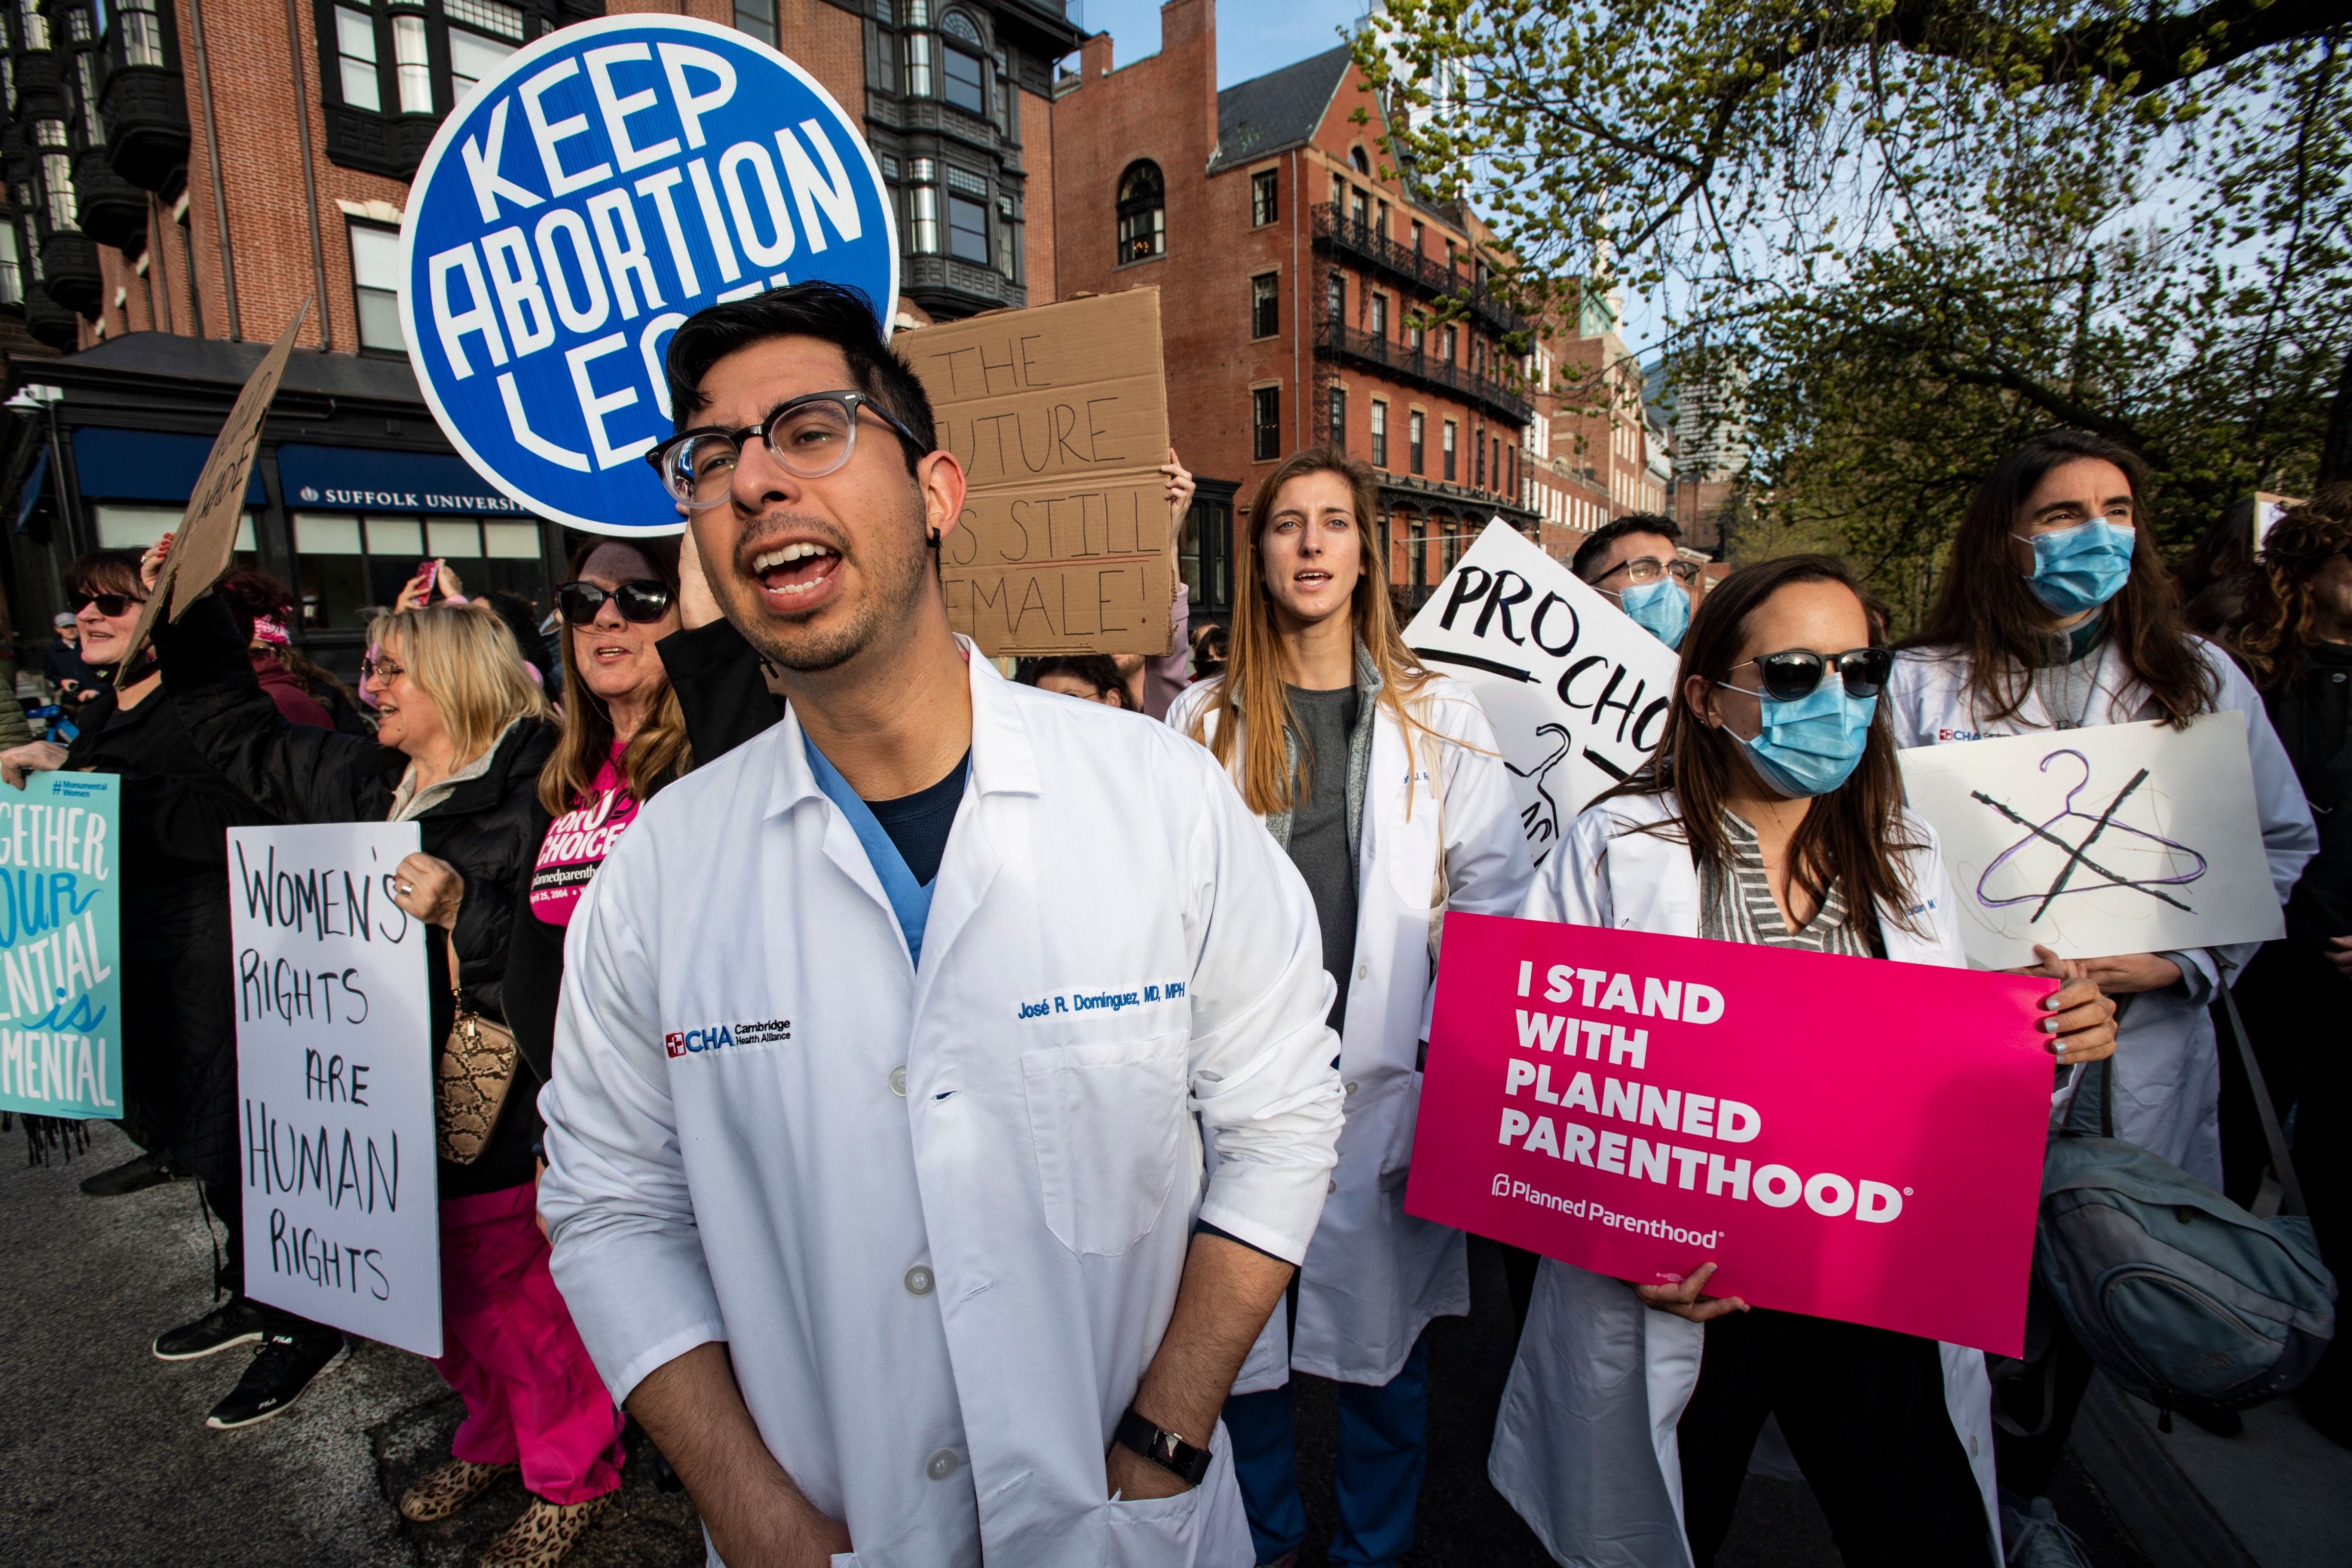 A group of doctors and medical workers join protesters gathering in front of the State House to show support and rally for abortion rights in Boston, Massachusetts on May 3. (Joseph Prezioso / AFP)